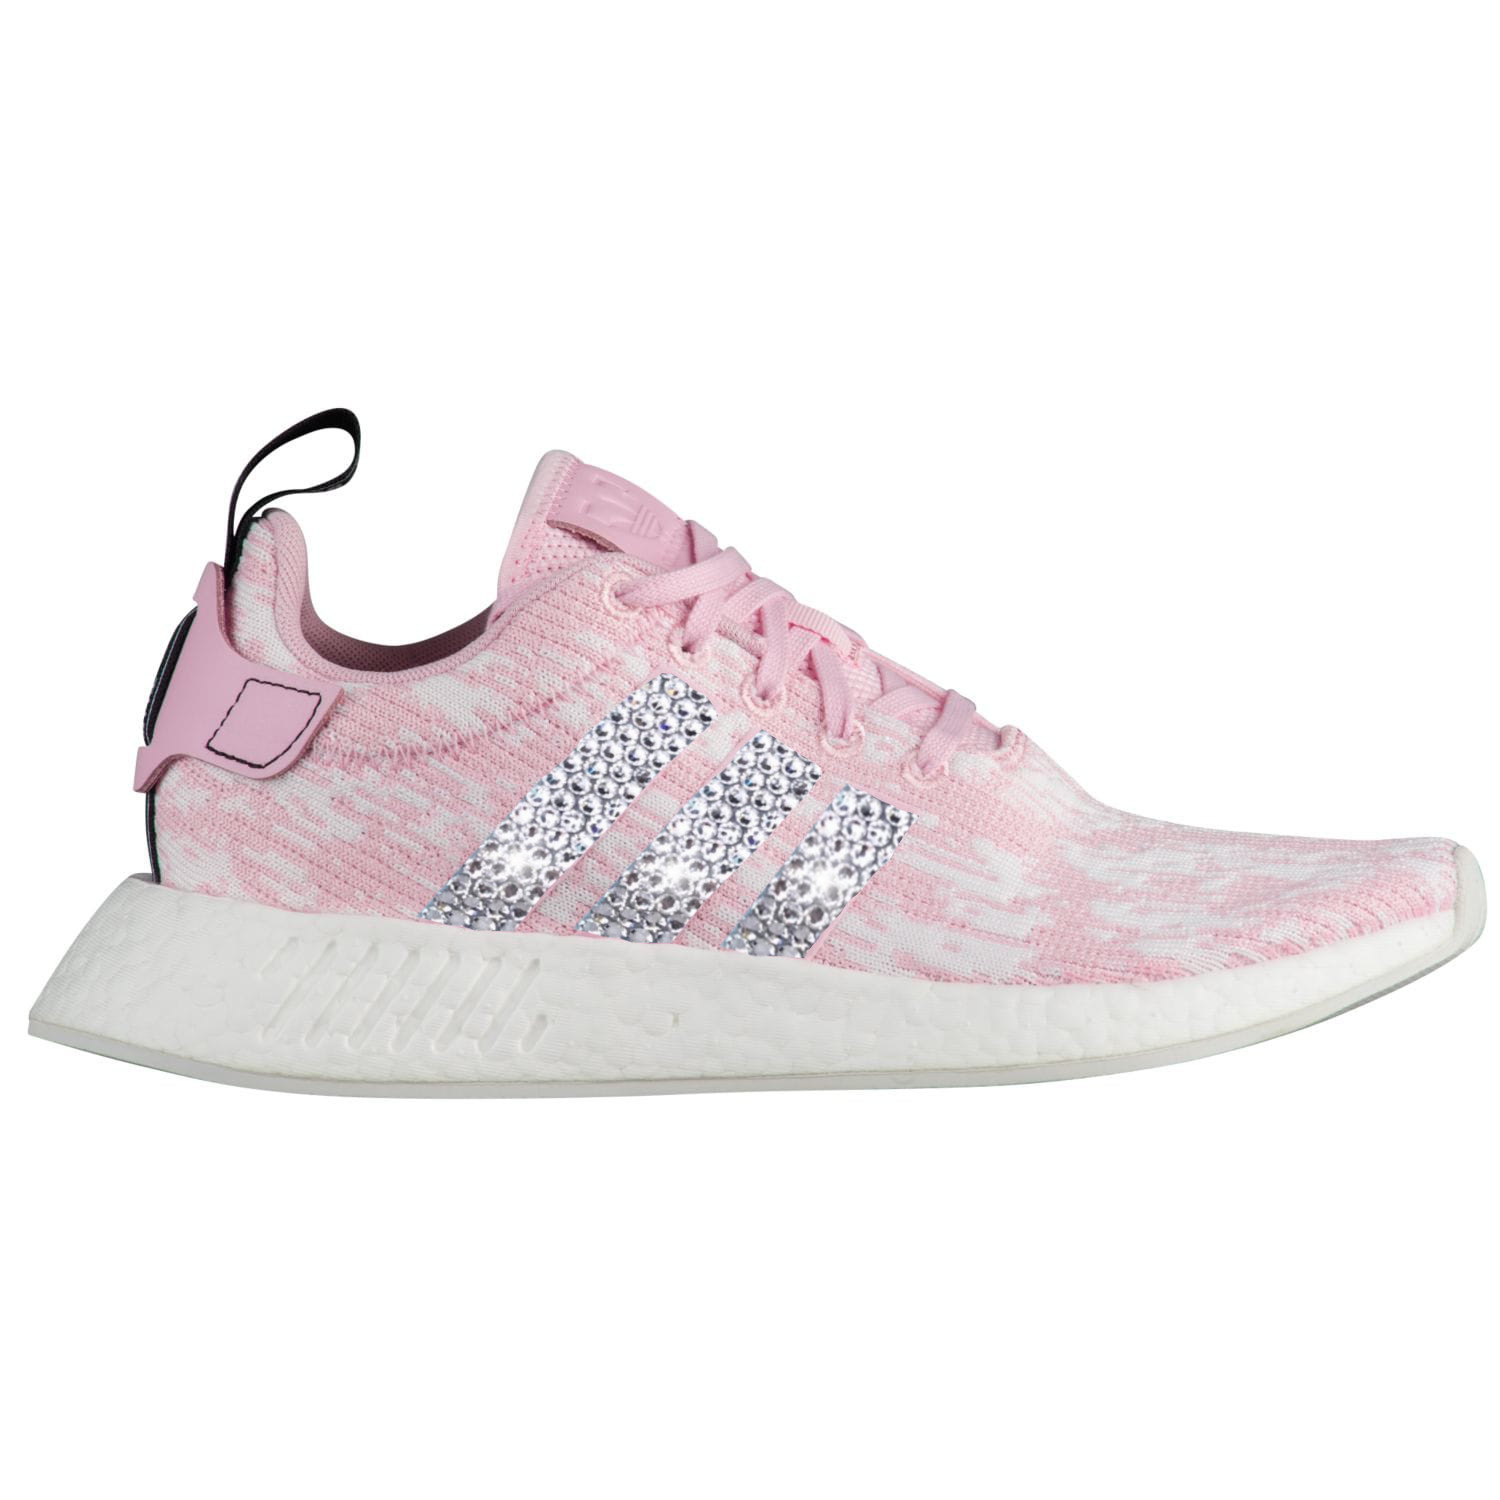 pink adidas with black stripes